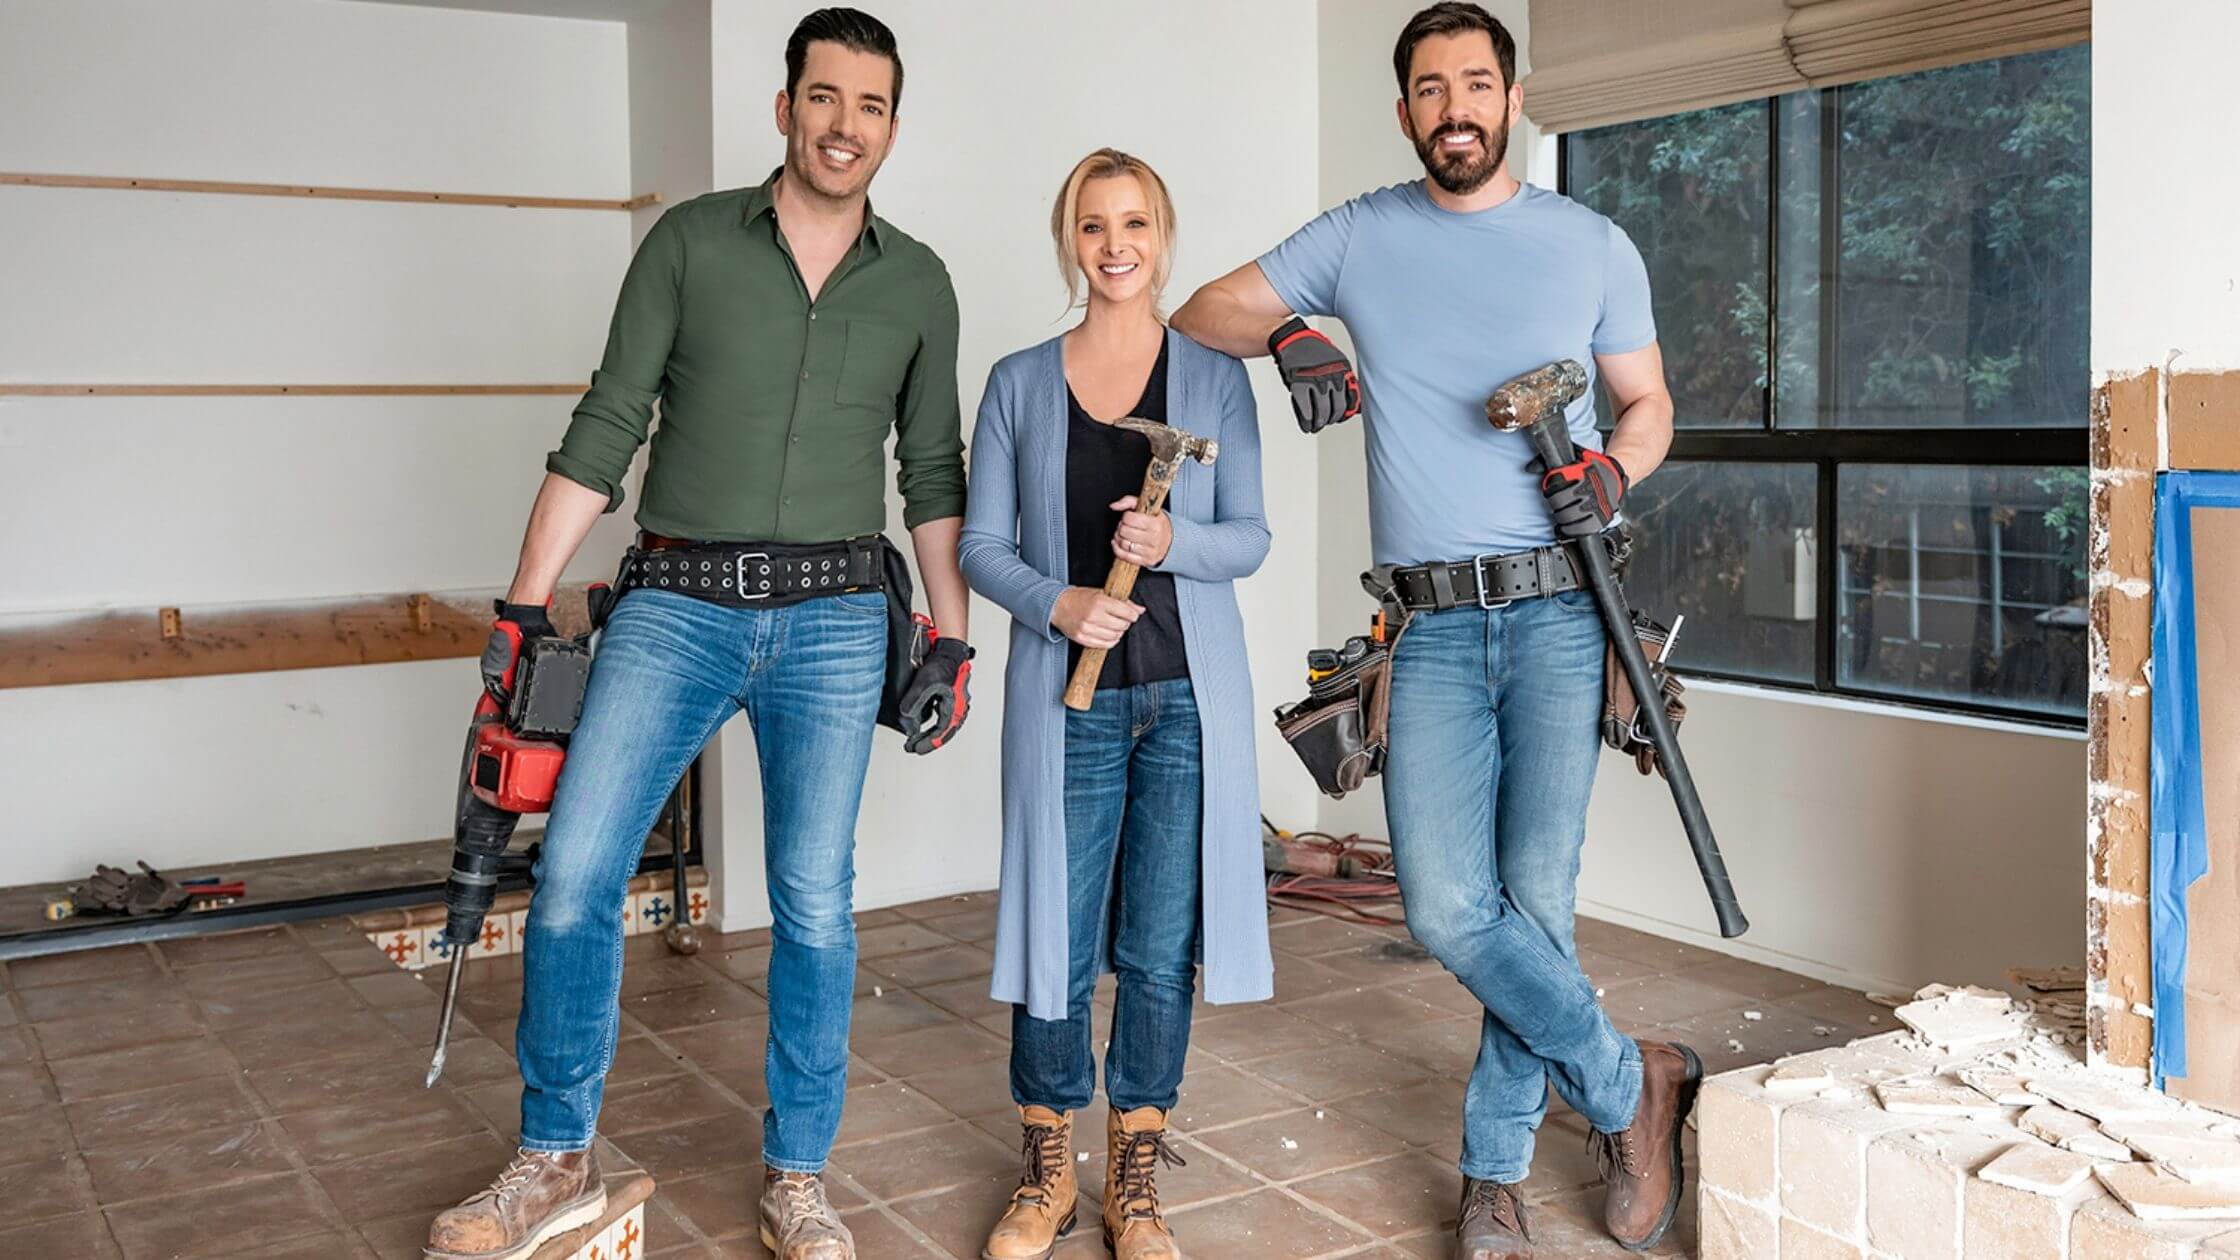 Celebrities Drew And Jonathan Scott Help Lisa Kudrow Turn Her Apartment Into A Pet-friendly Home.